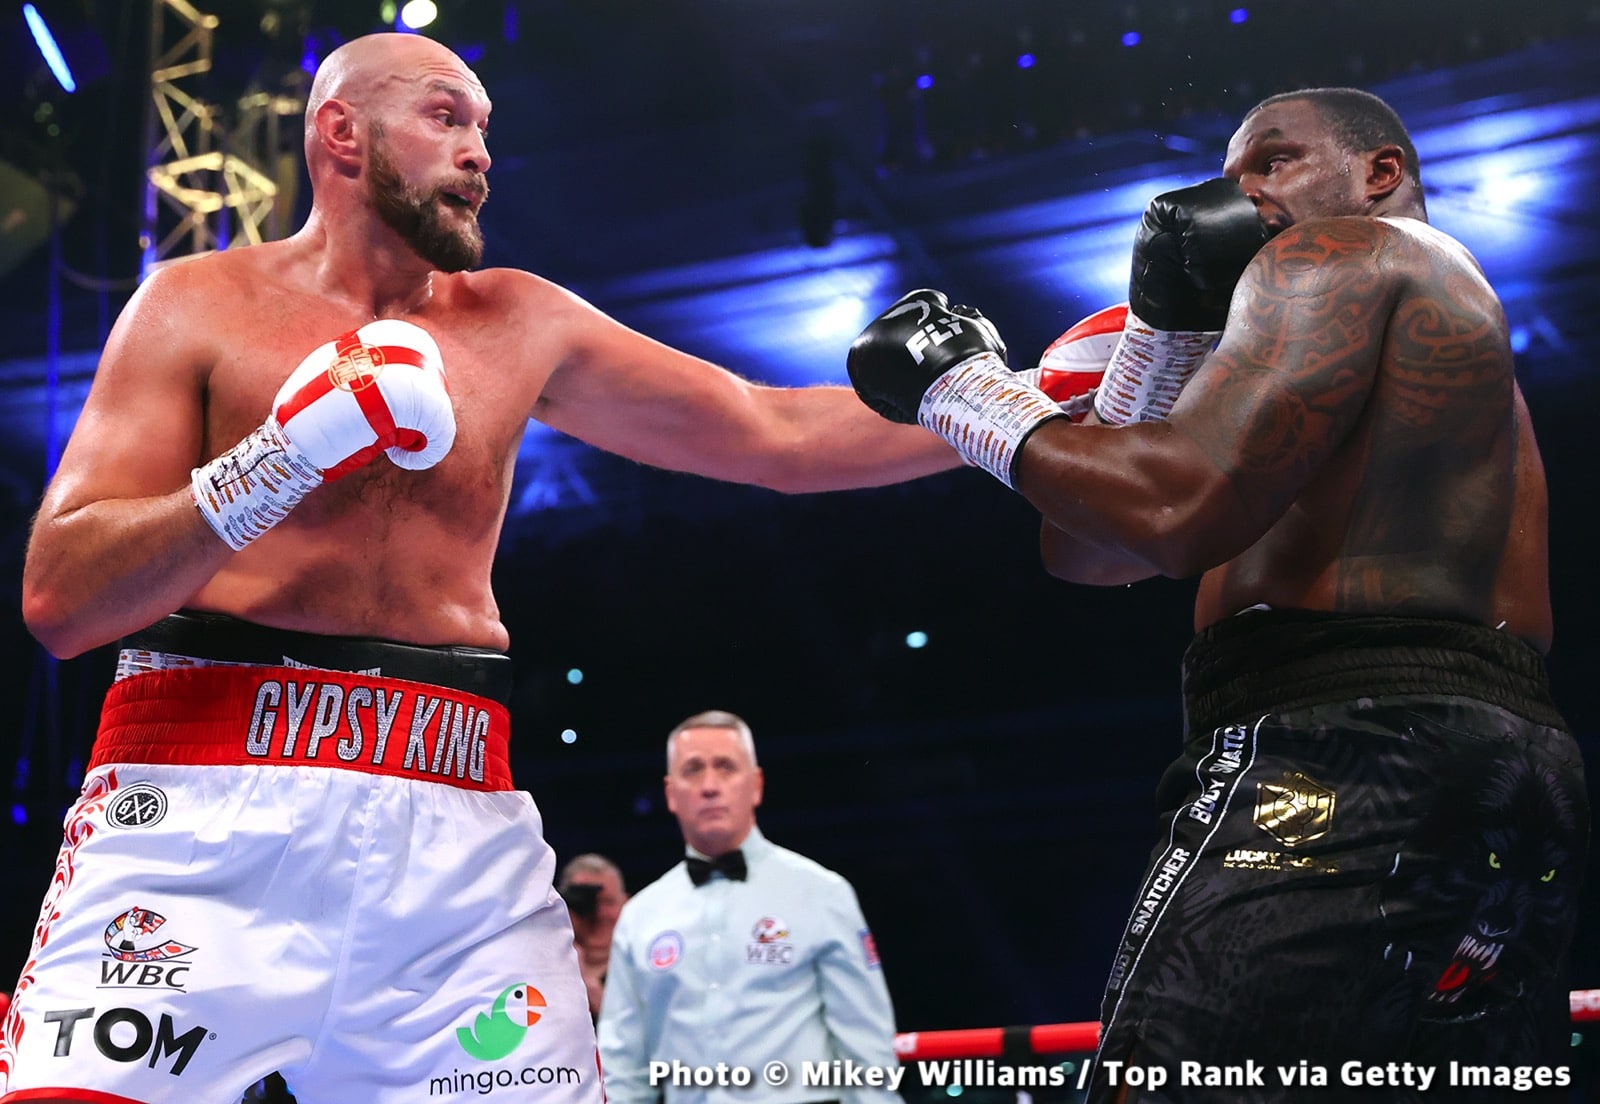 Image: Dillian Whyte's decision to fight southpaw against Tyson Fury surprises Dominic Ingle